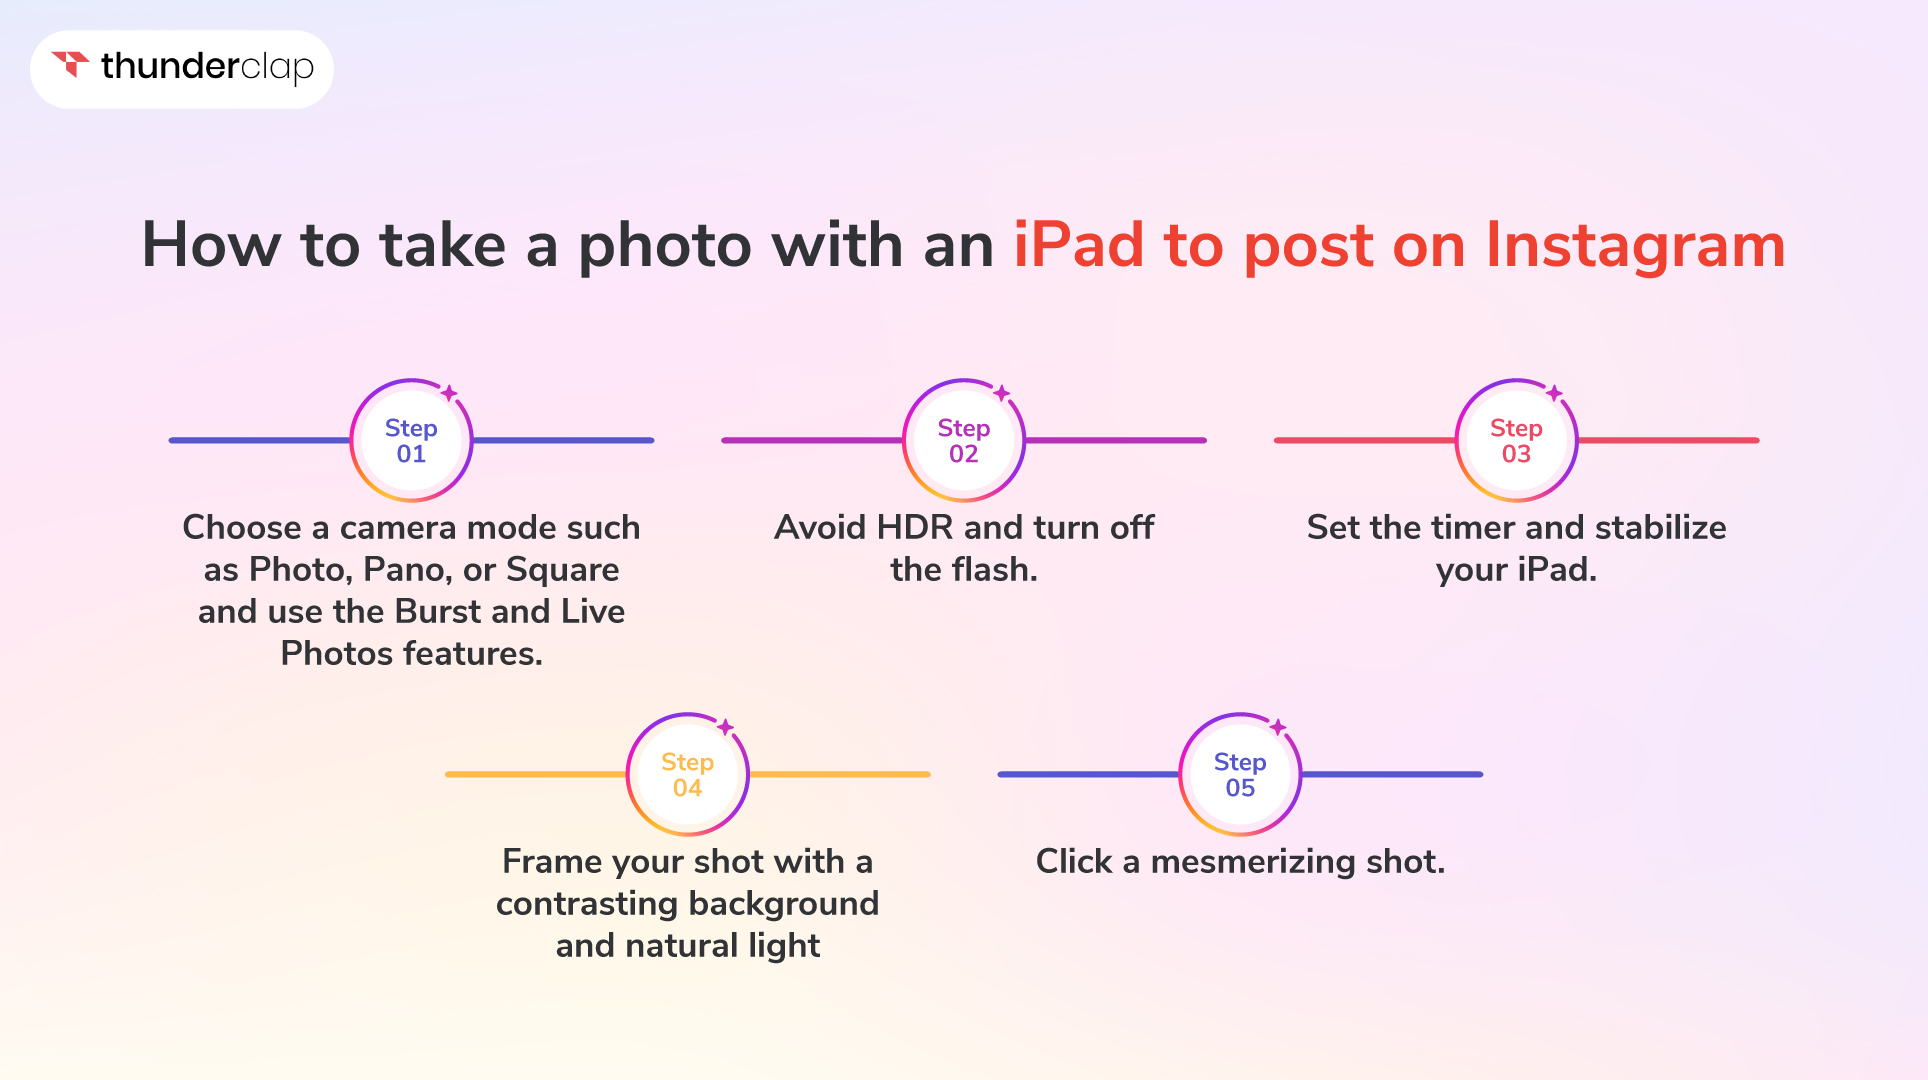 how to take a photo with an iPad to post on Instagram